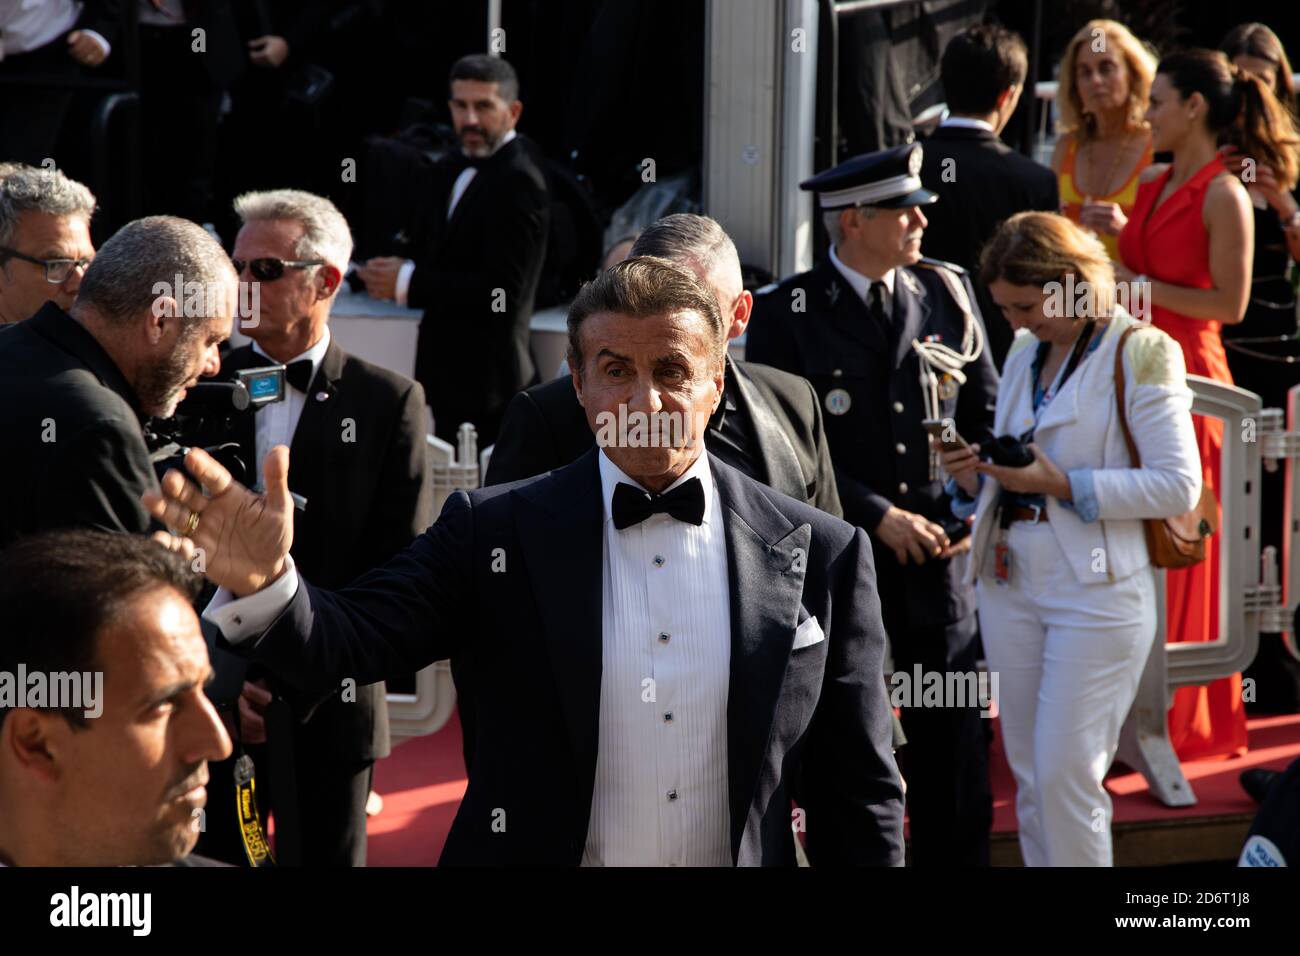 CANNES, FRANCE - May 25, 2019: Sylvester Stallone arrives at the Cannes Film Festival. Stock Photo